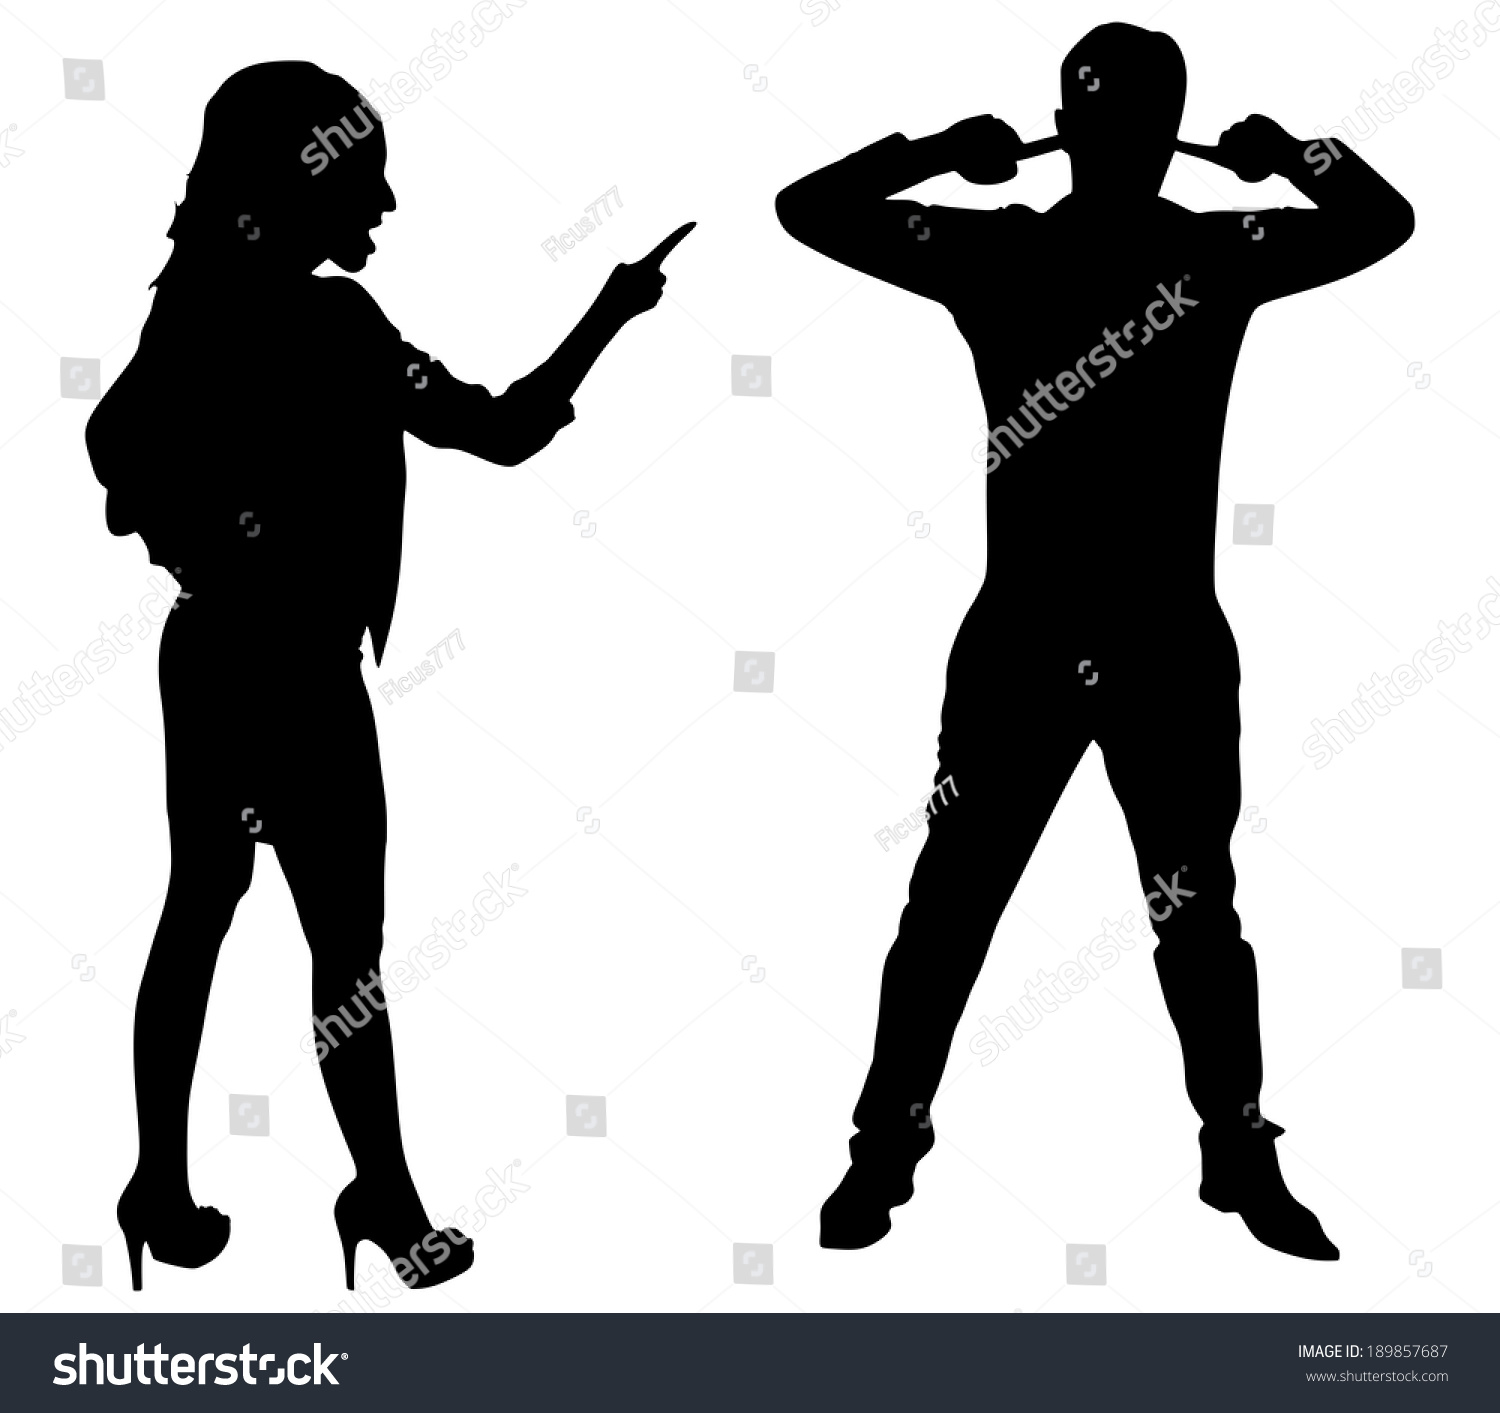 Image result for relationship issues